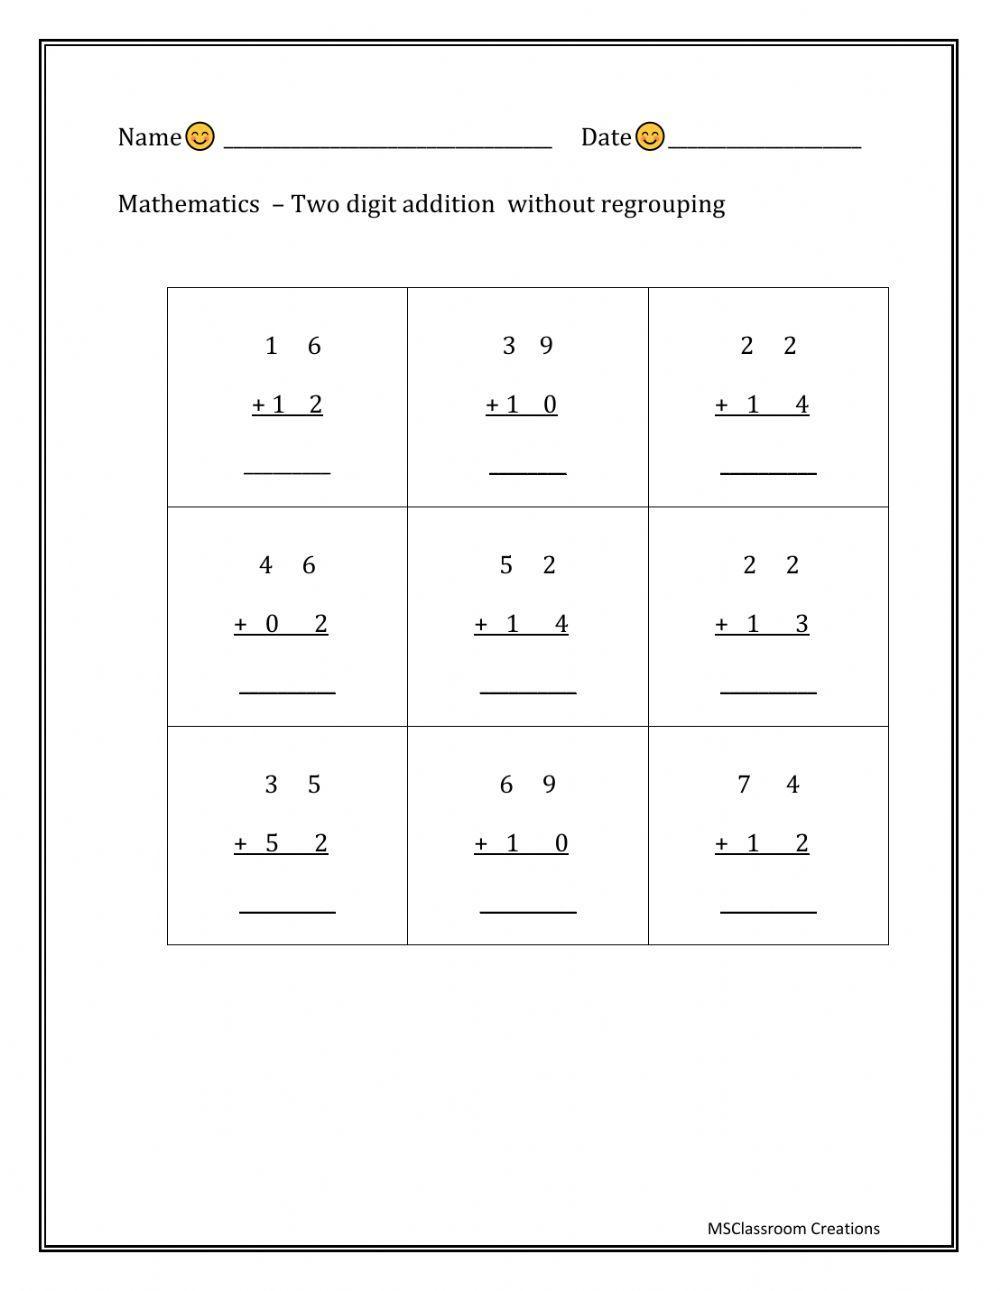 Two digit addition - without regrouping